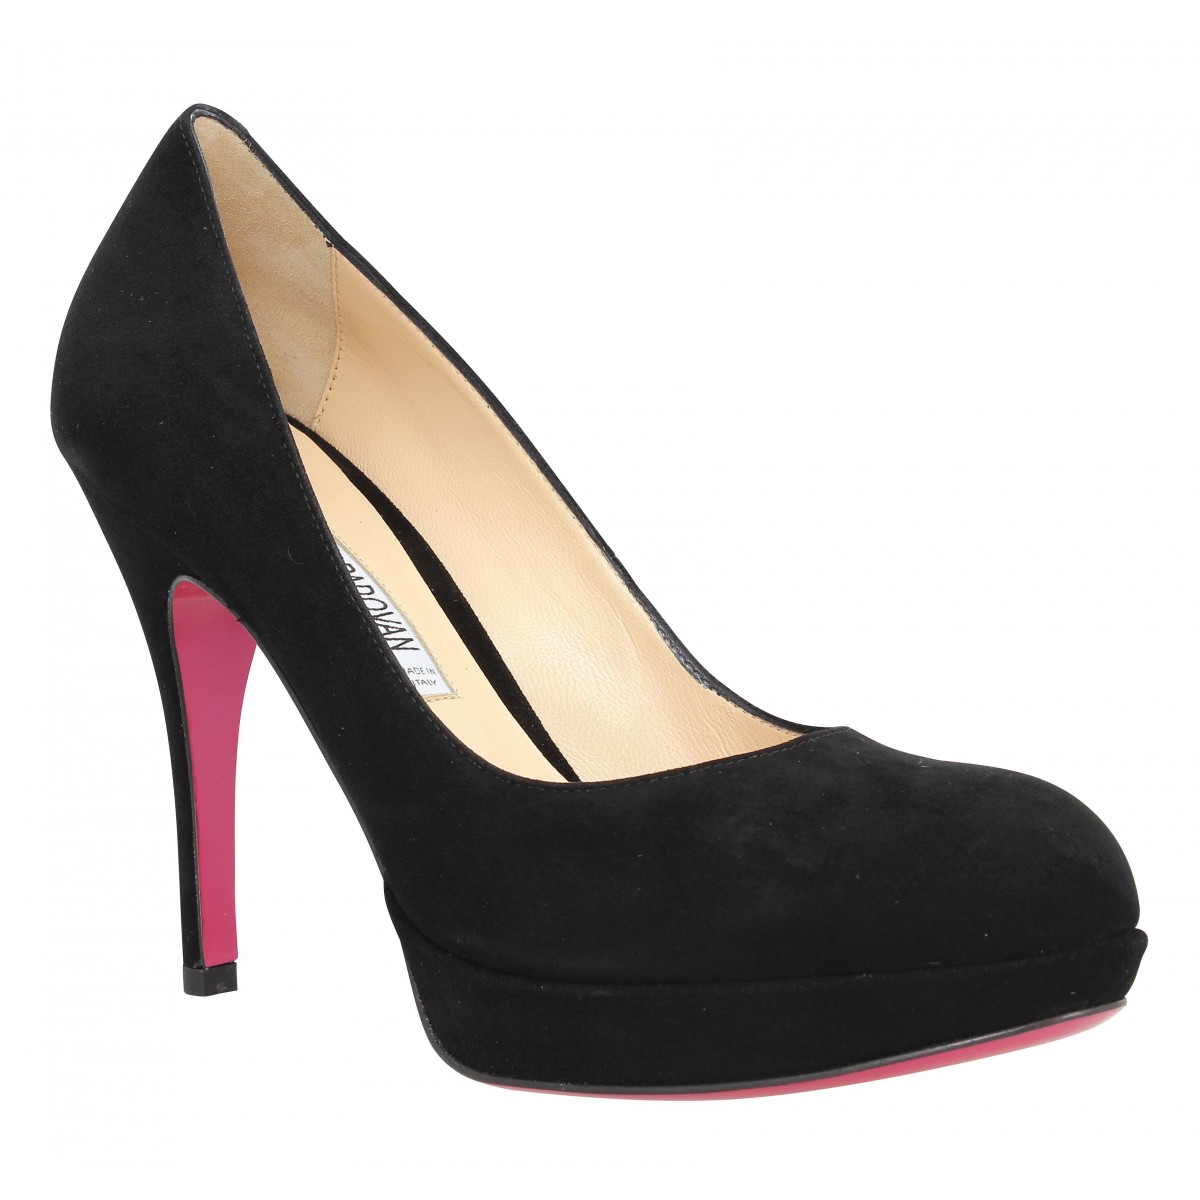 Femme Chaussures Luciano Padovan Femme Escarpins Luciano Padovan Femme Escarpins Luciano Padovan Femme Escarpins LUCIANO PADOVAN 38 noir Escarpins Luciano Padovan Femme 